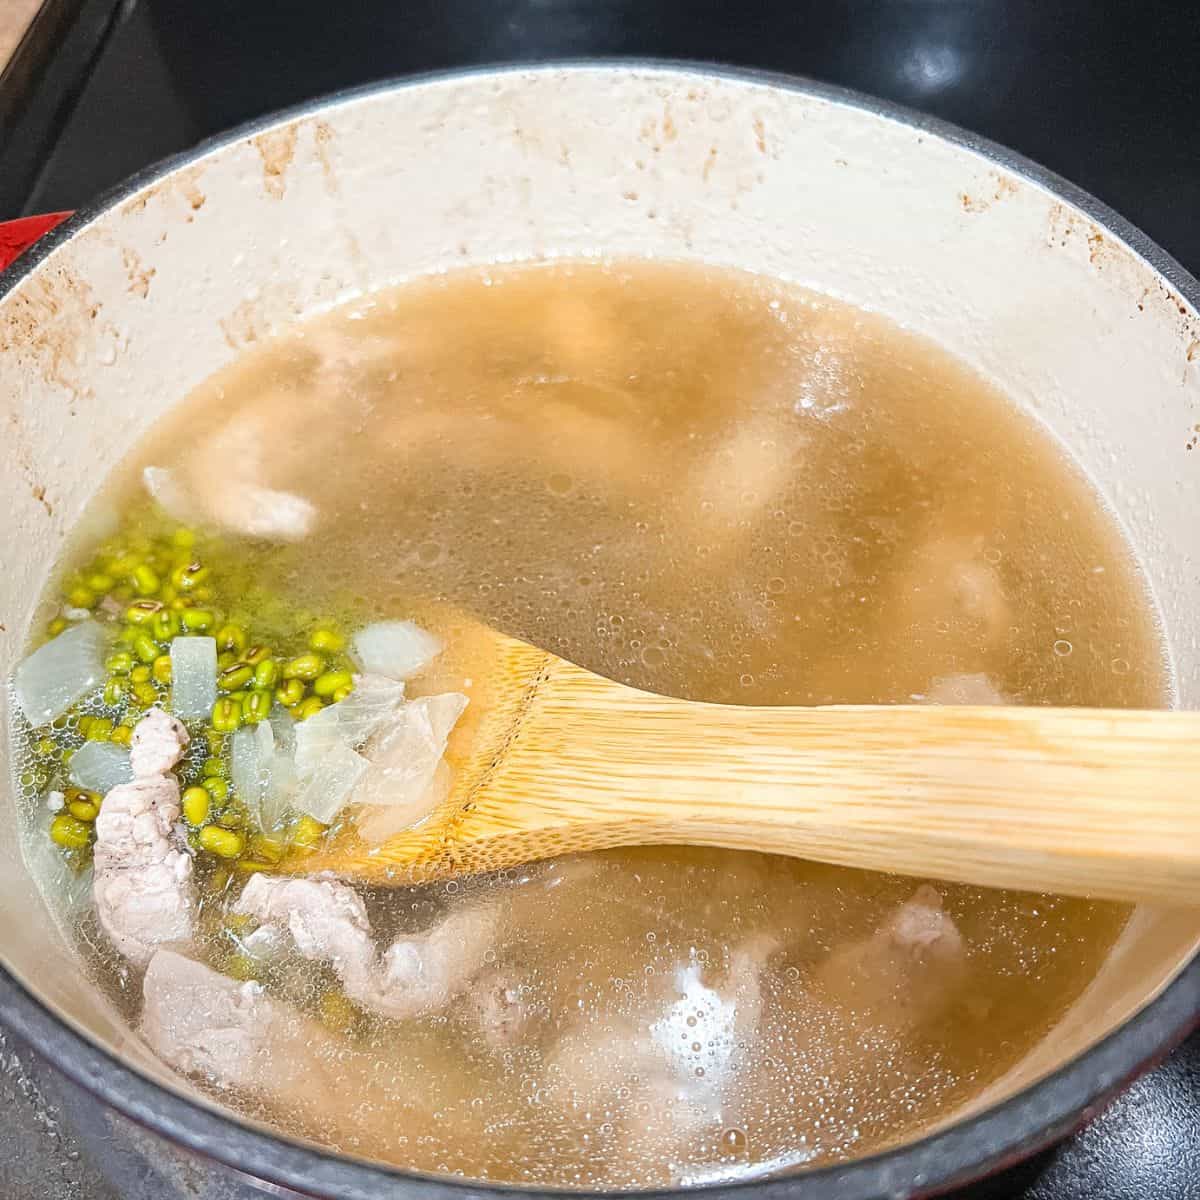 Adding mung beans and beef broth to the pot.